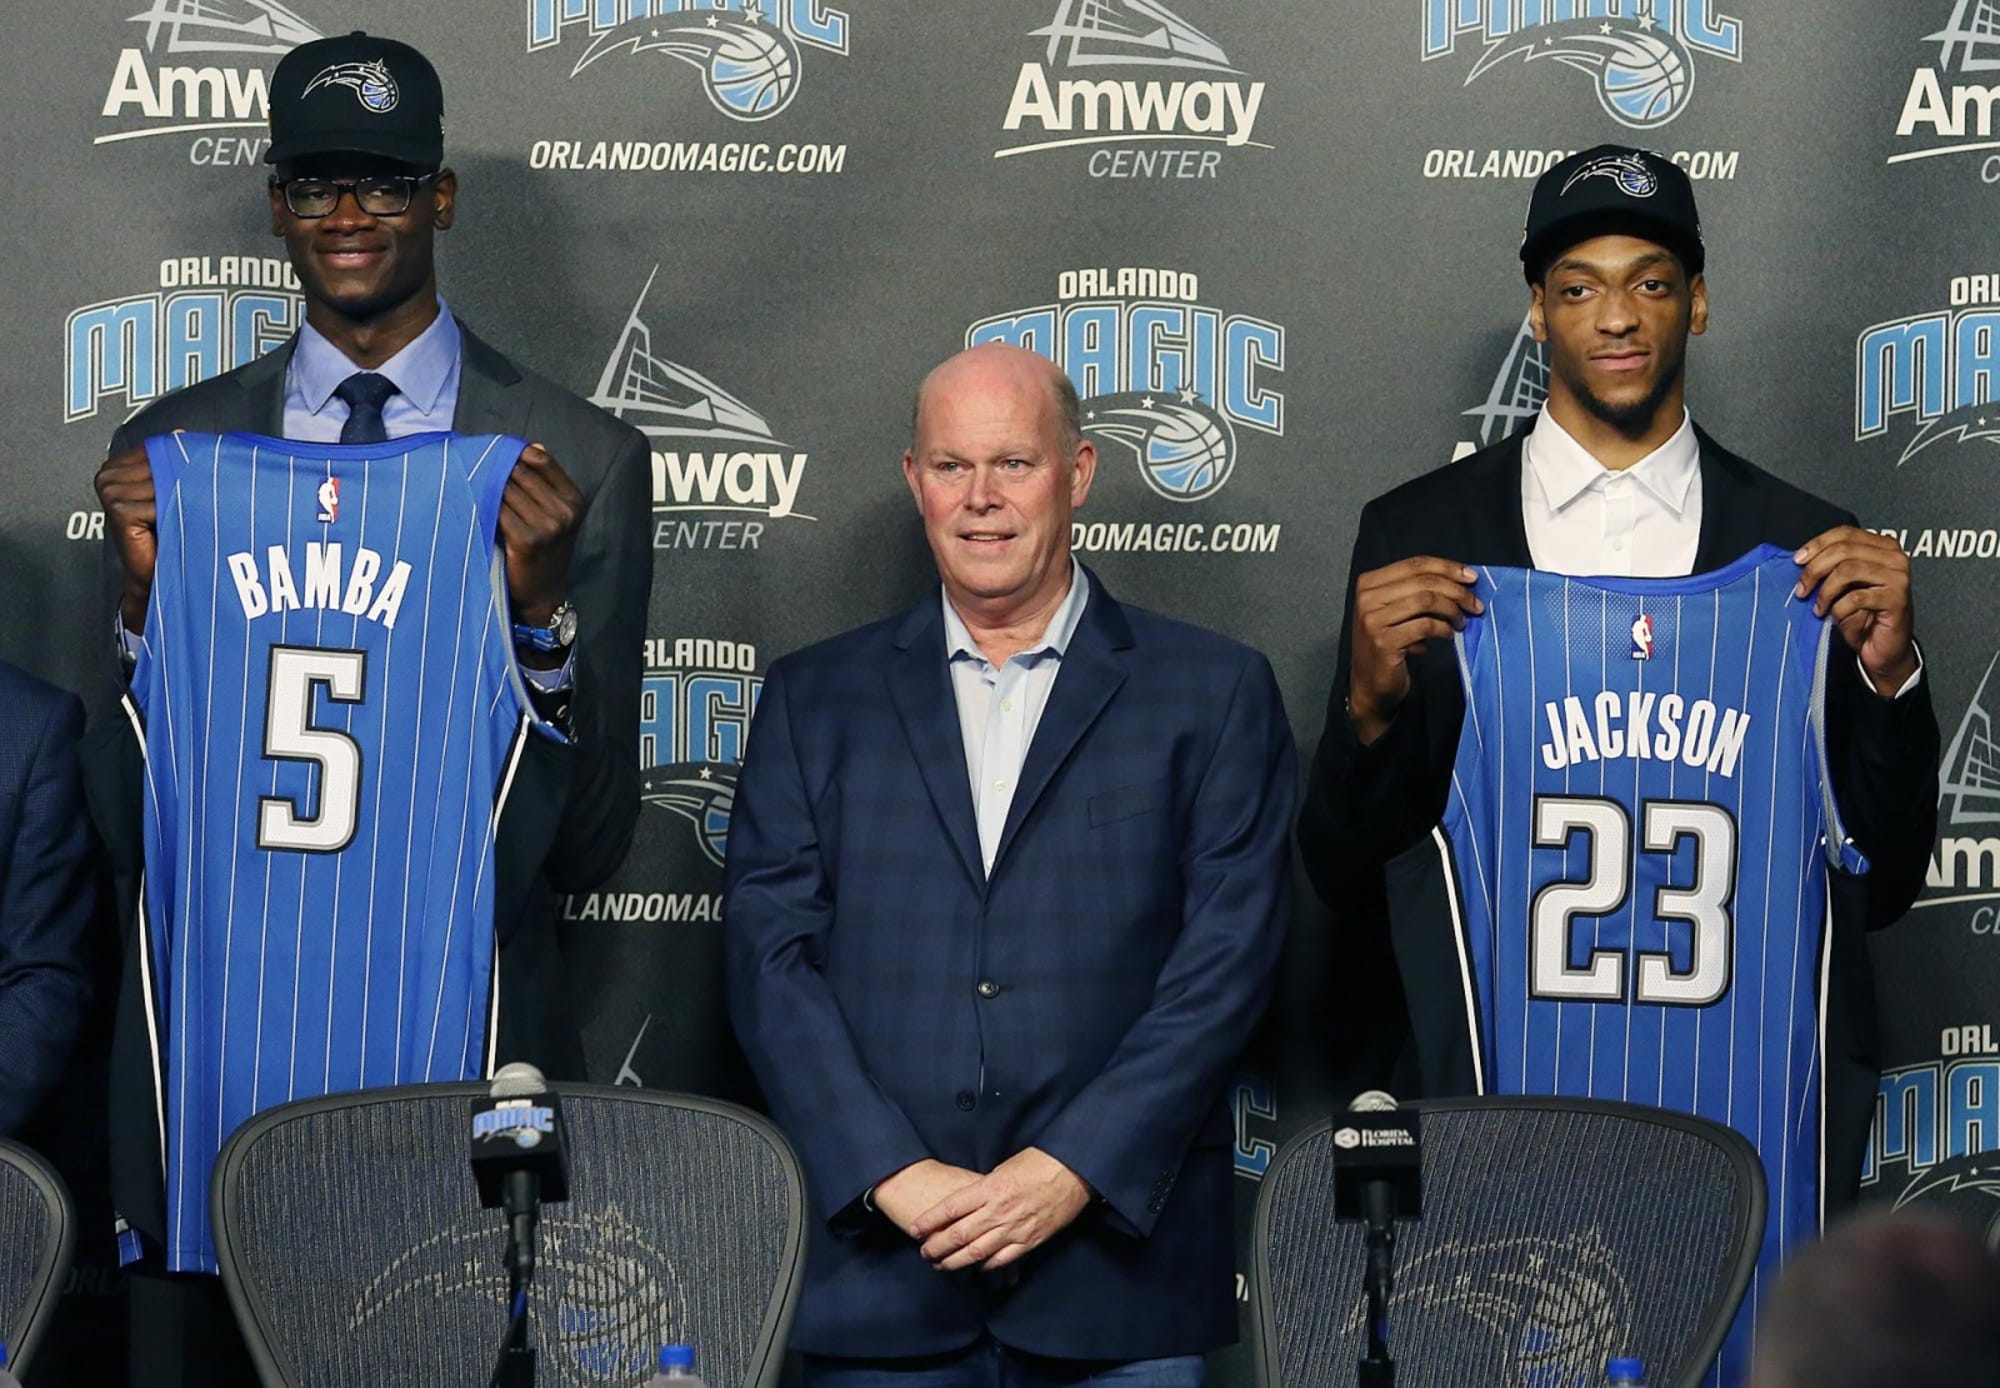 Orlando Magic's draft leaves more question marks about team's future